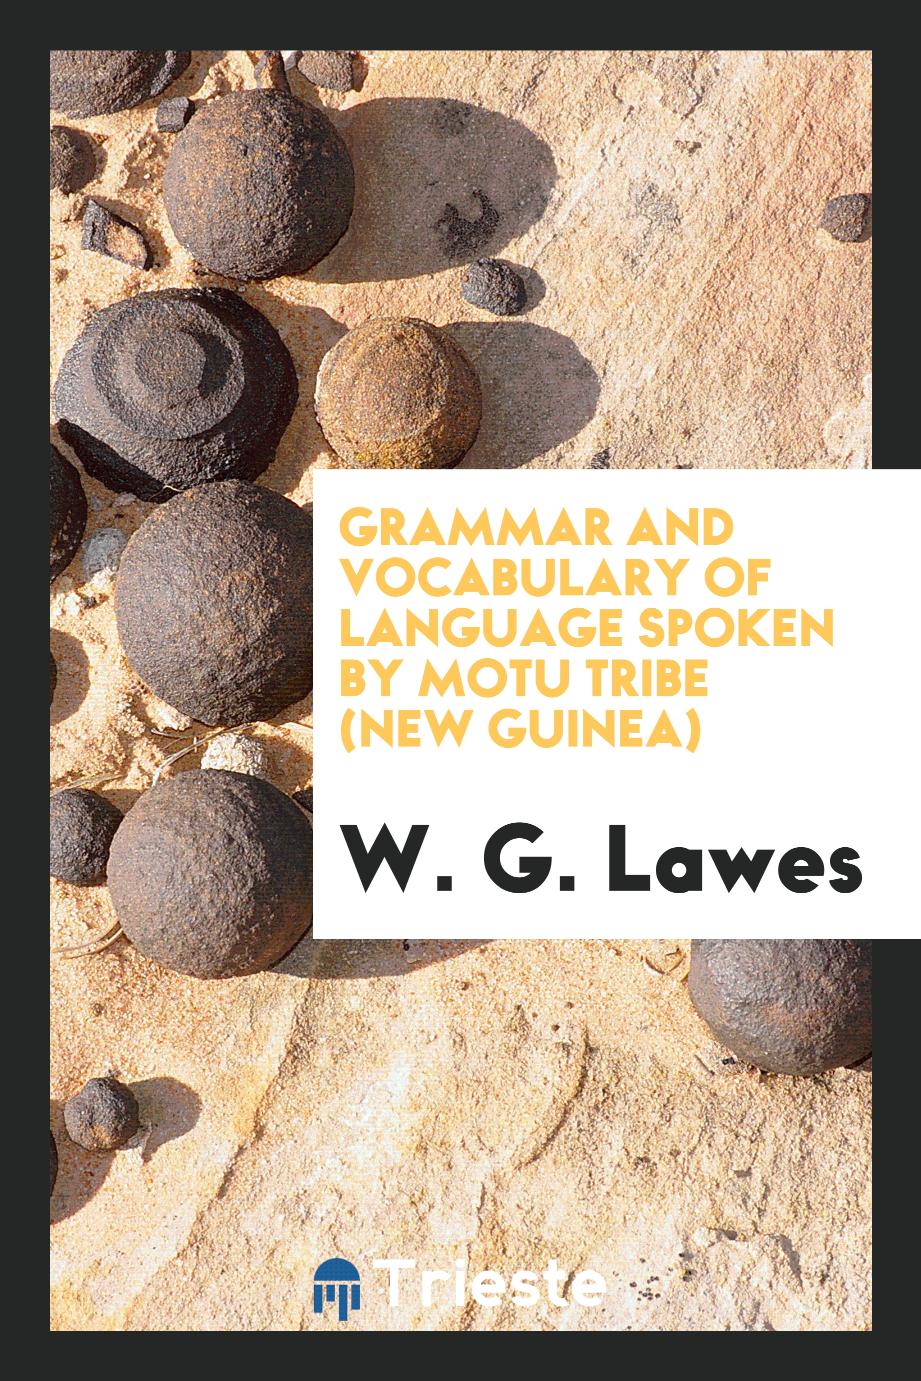 Grammar and Vocabulary of Language Spoken by Motu Tribe (New Guinea) - W. G. Lawes